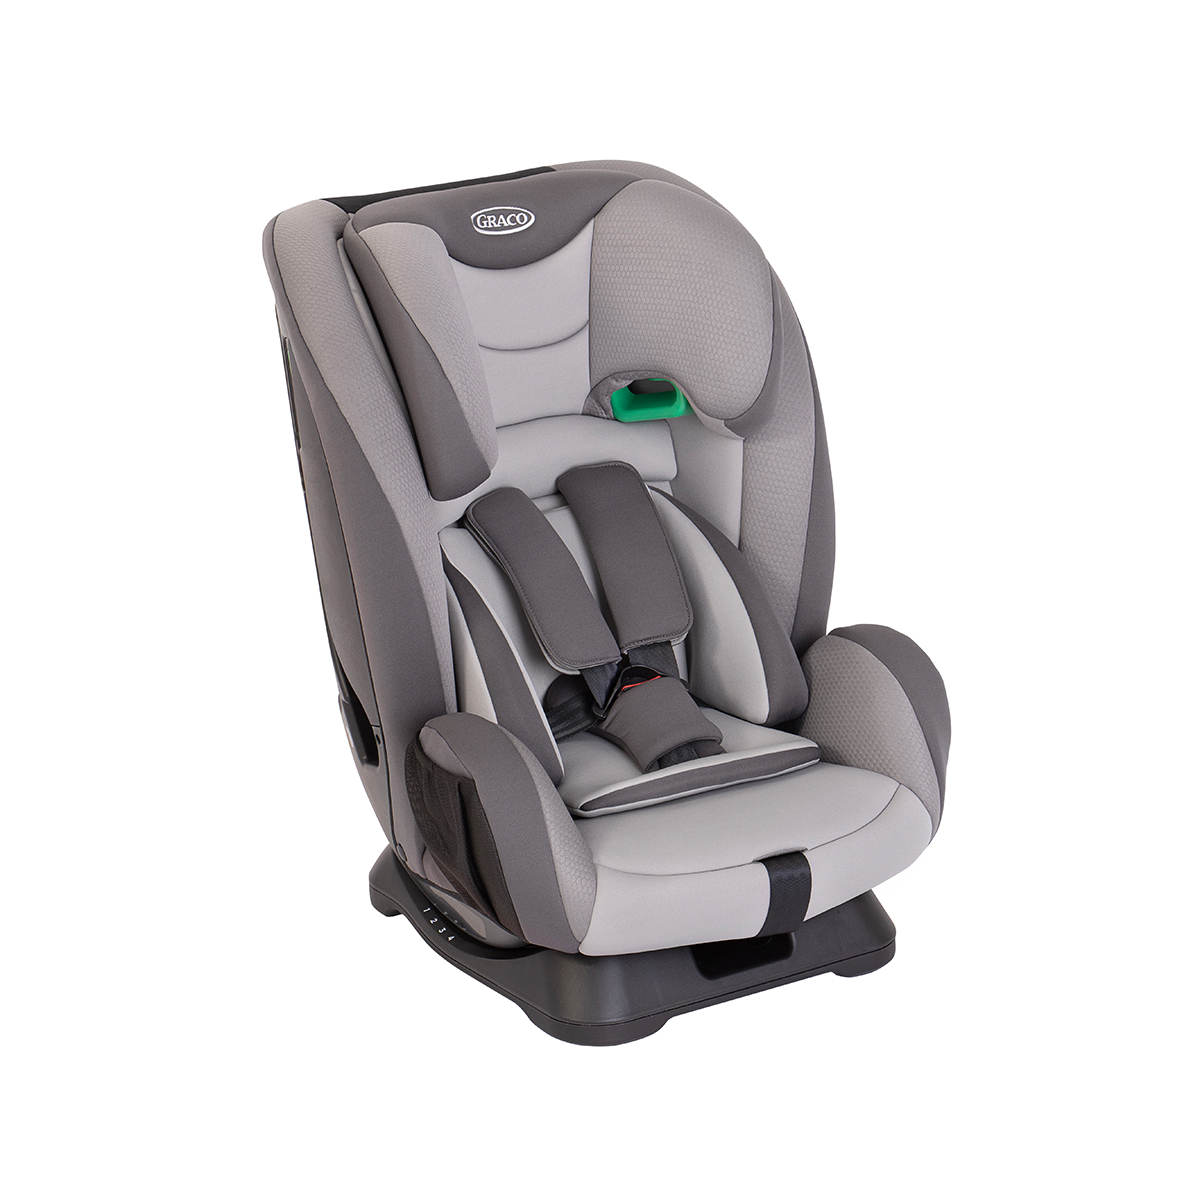 Graco FlexiGrow™ R129 2-in-1 harness booster car seat in harness booster mode three quarter angle.